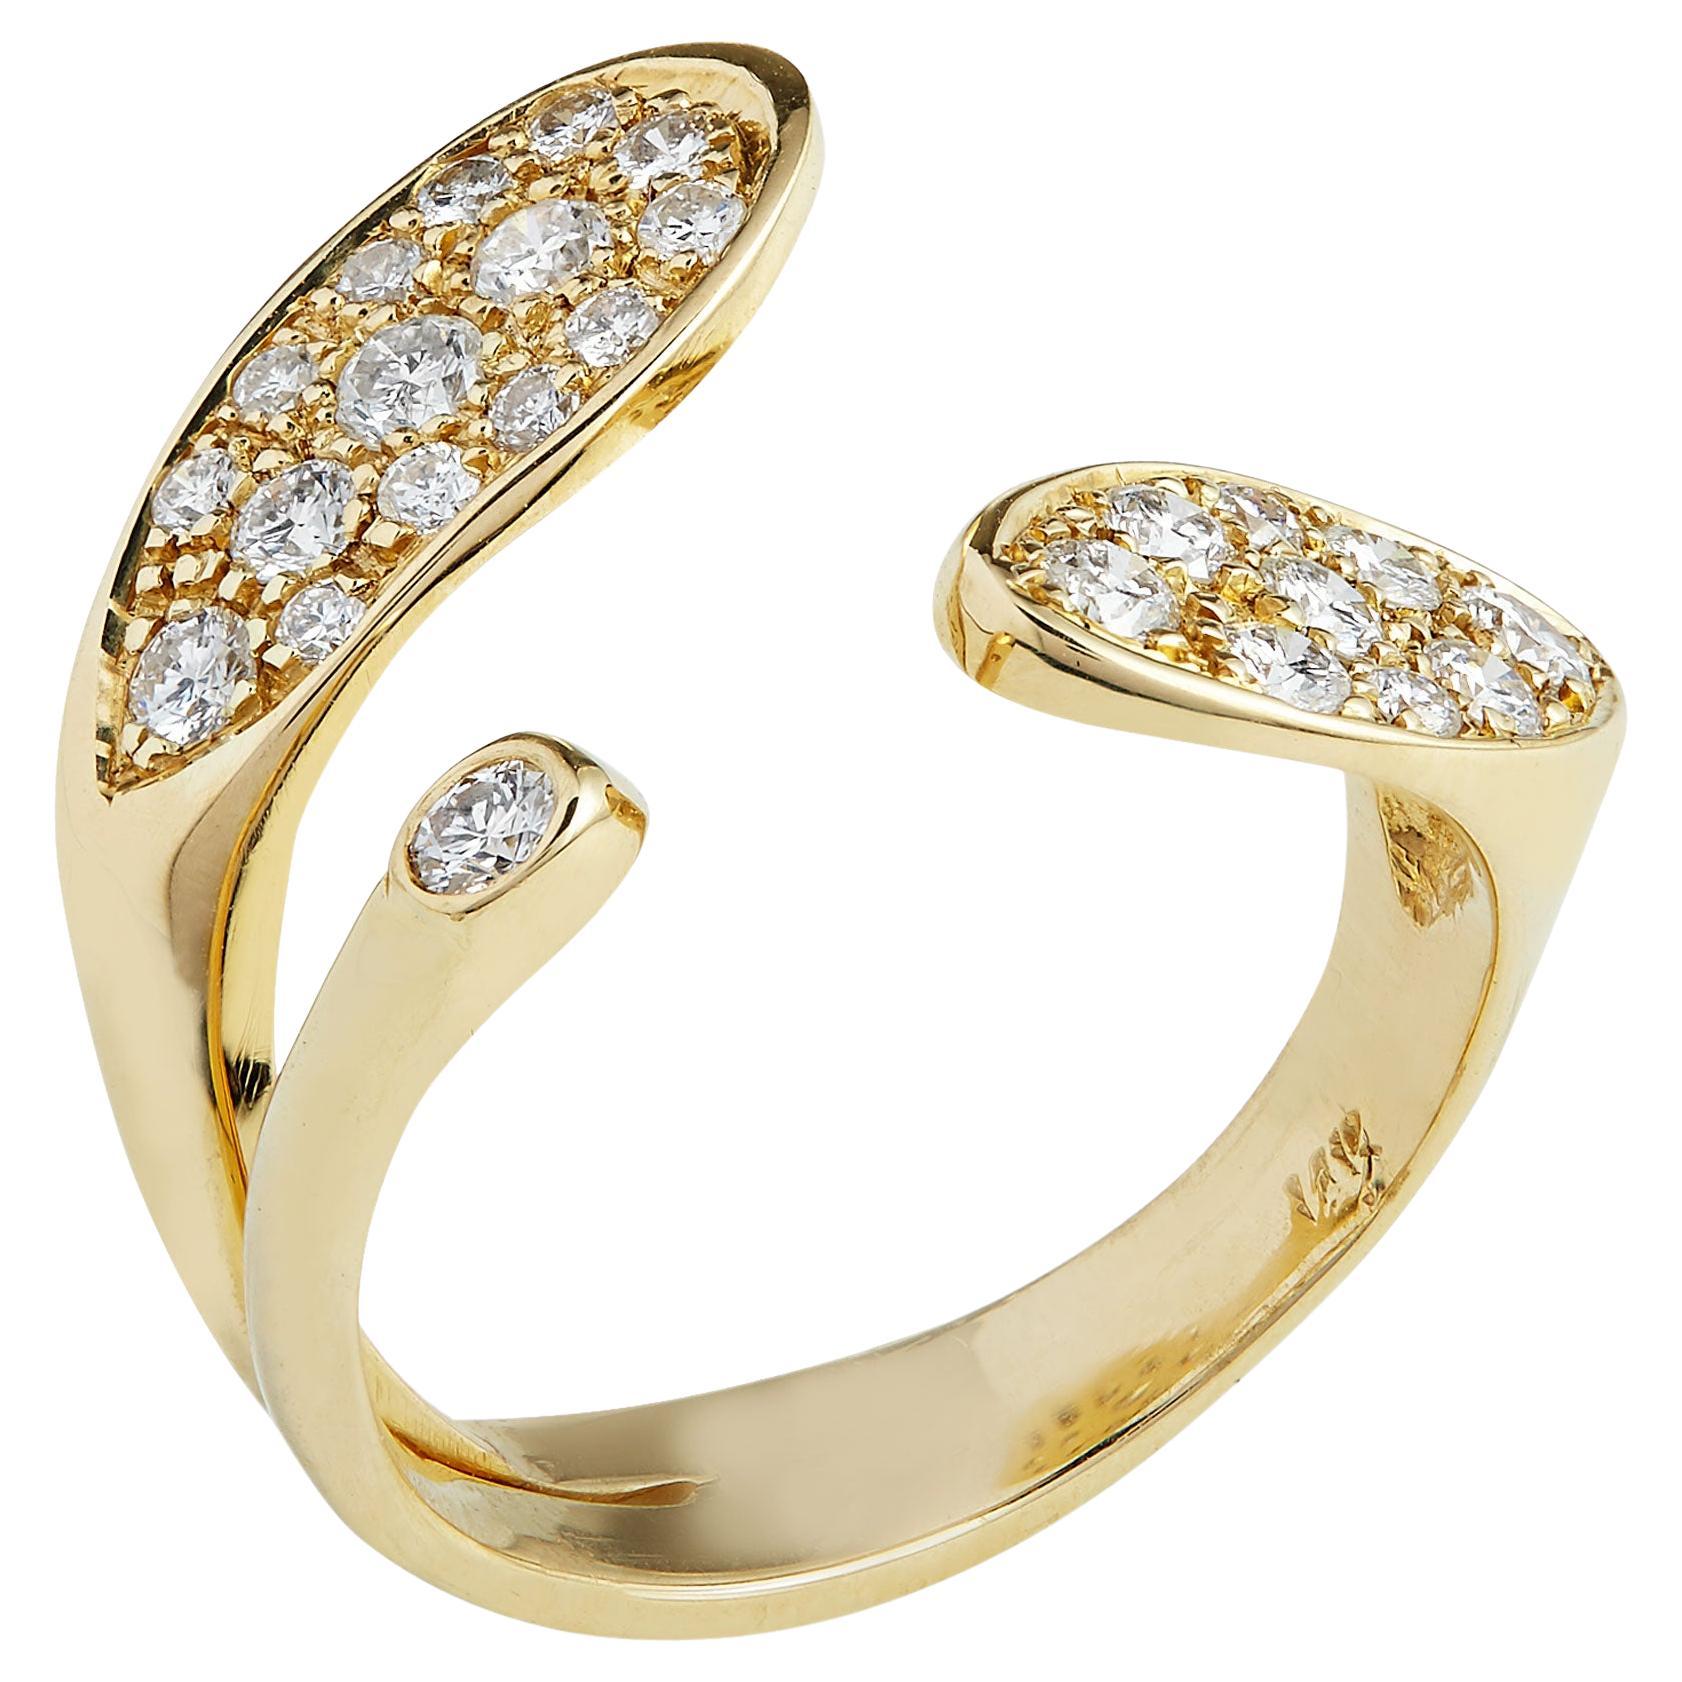 Handmade Open Form Pave Diamond Ring 18k Gold Diamond Pave Stations For Sale